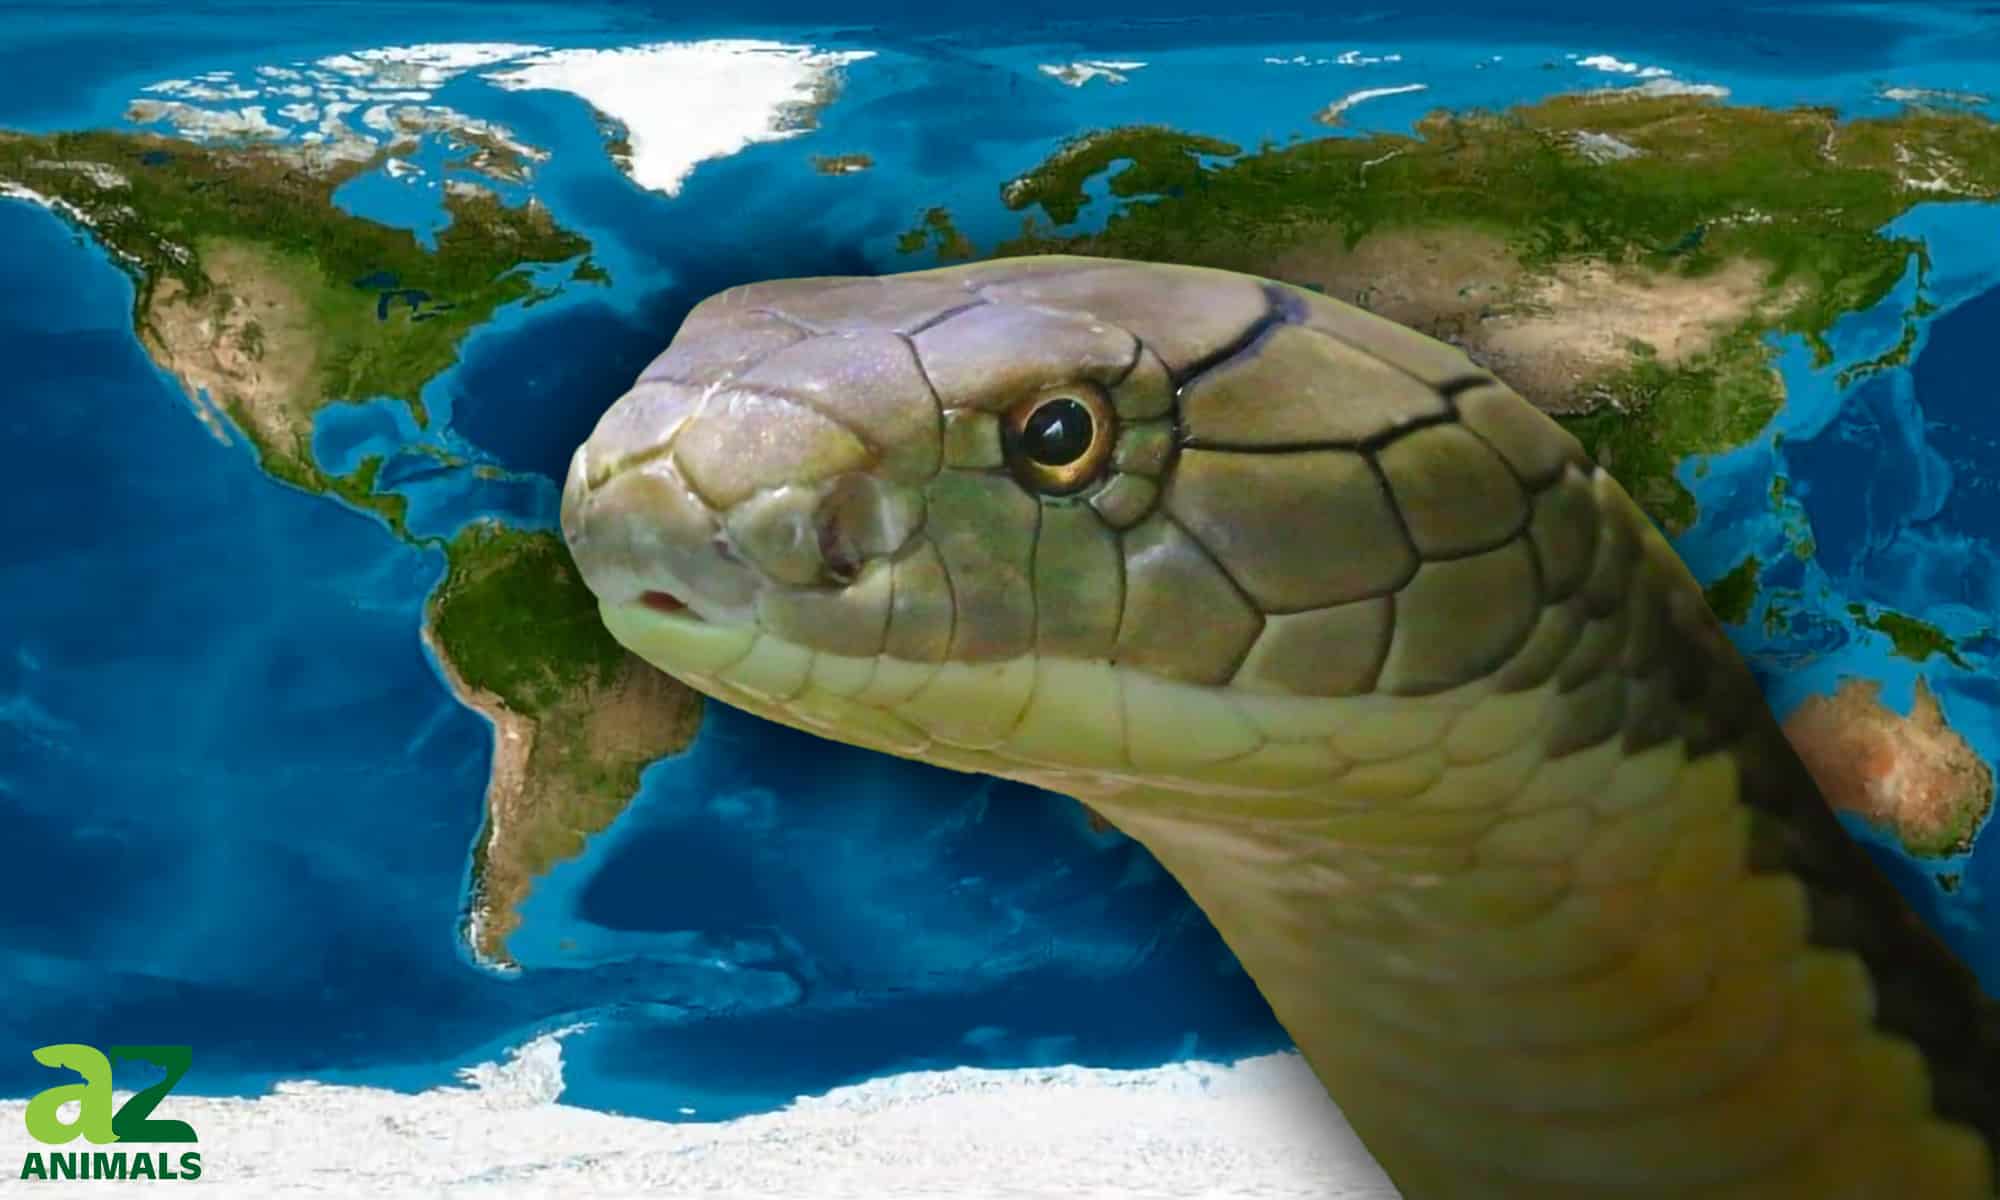 How Big is the Biggest King Cobra in the World?